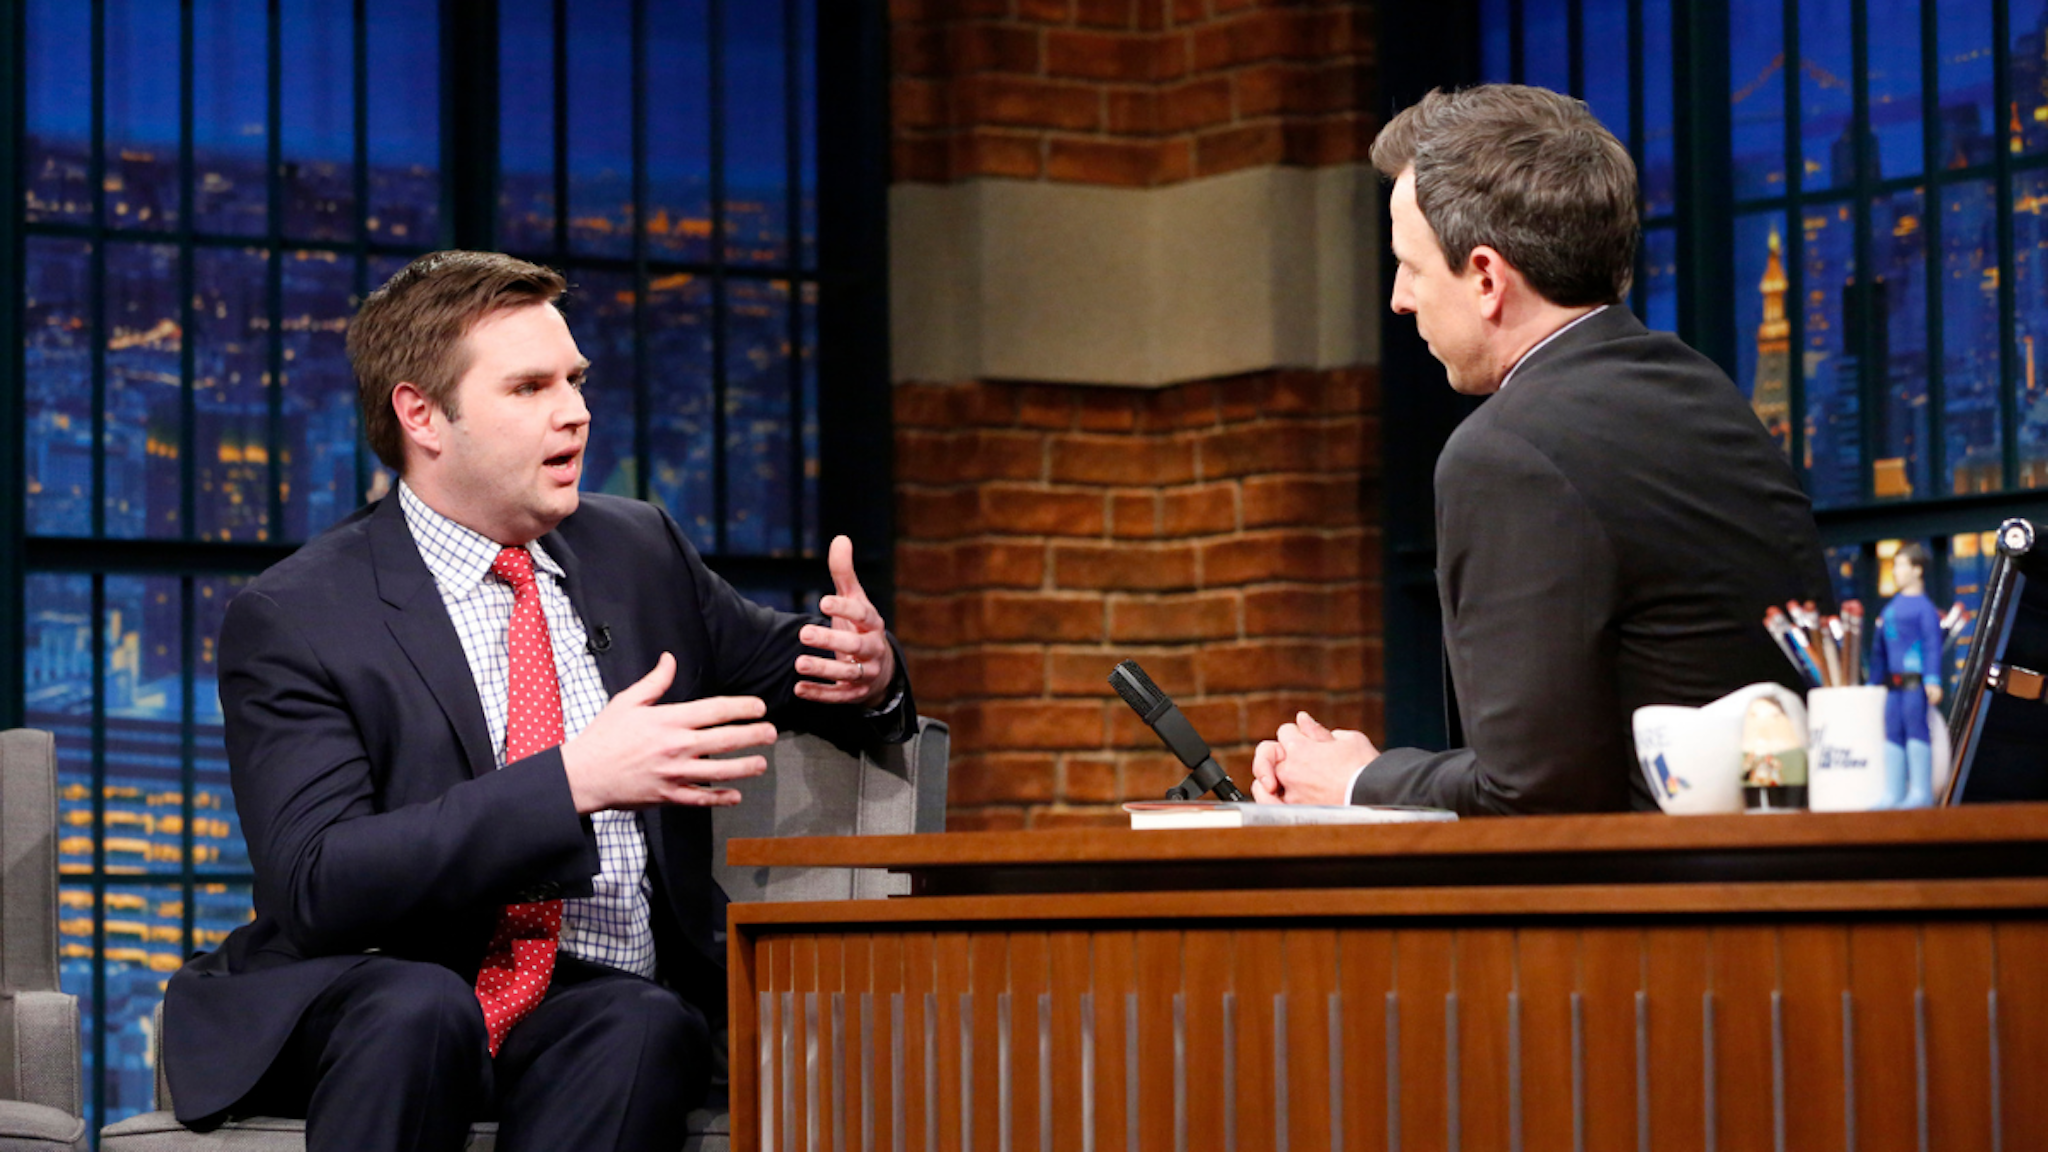 Episode 502 -- Pictured: (l-r) Author J.D. Vance during an interview with host Seth Meyers on March 15, 2017 --